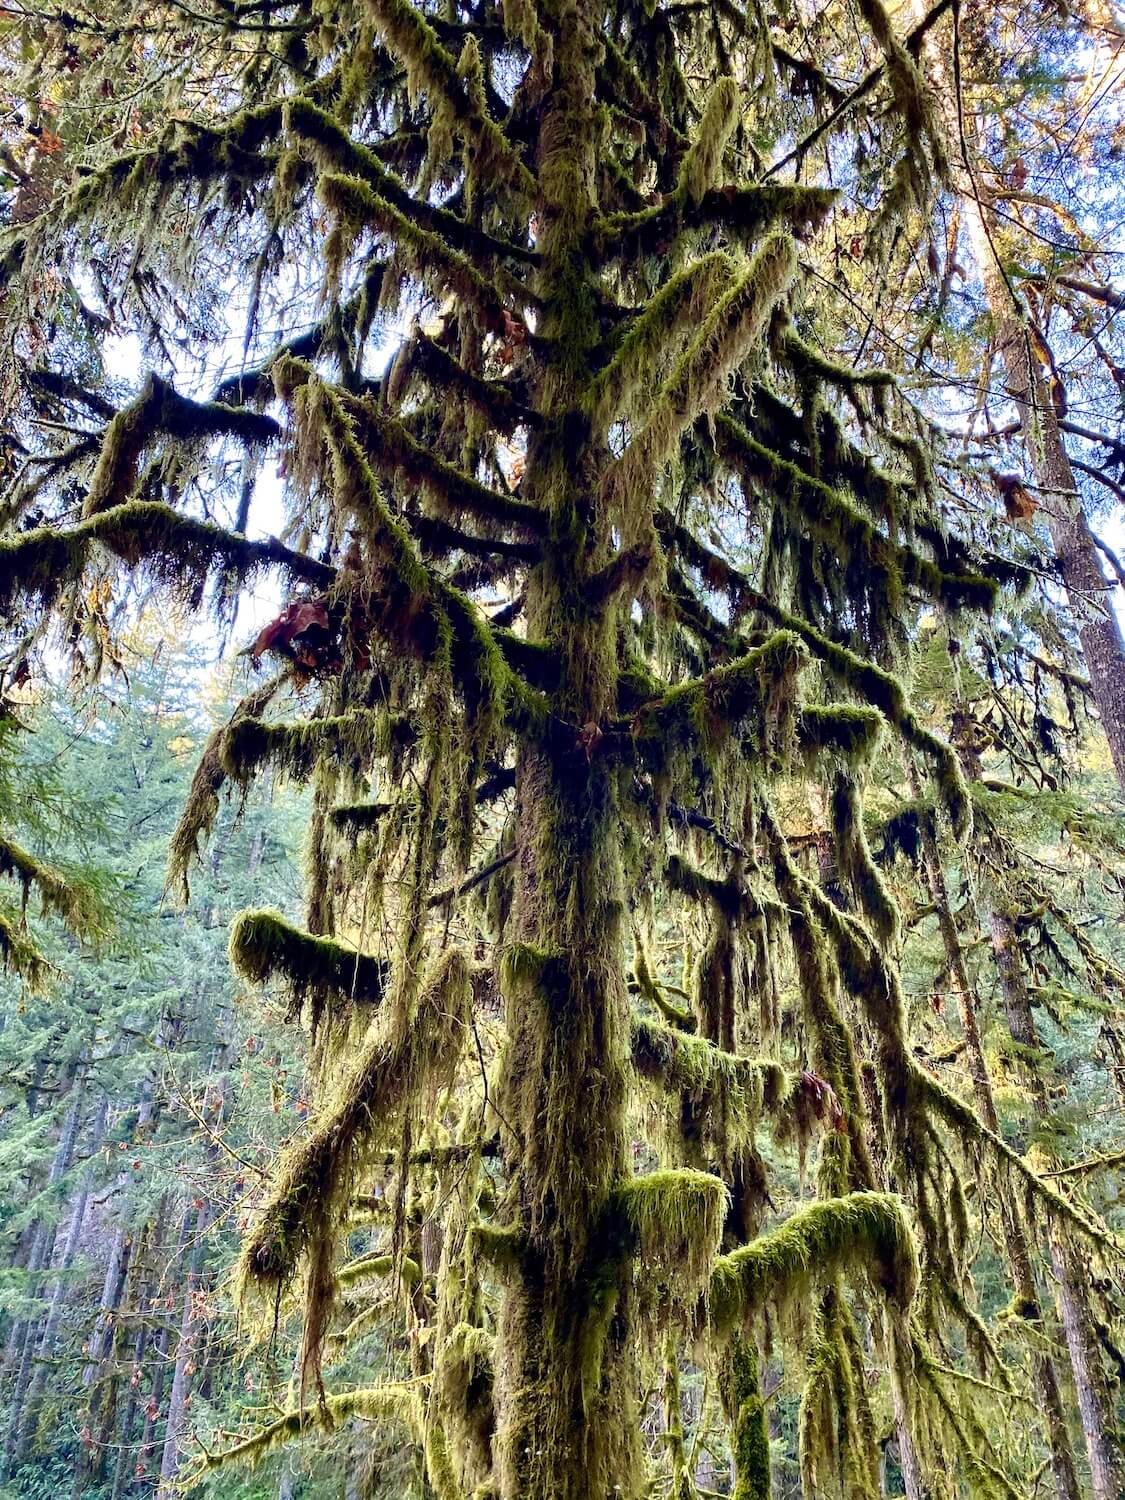 A moss covered maple tree appears to have a fur coat protection from the Winter elements in this Oregon forest. 